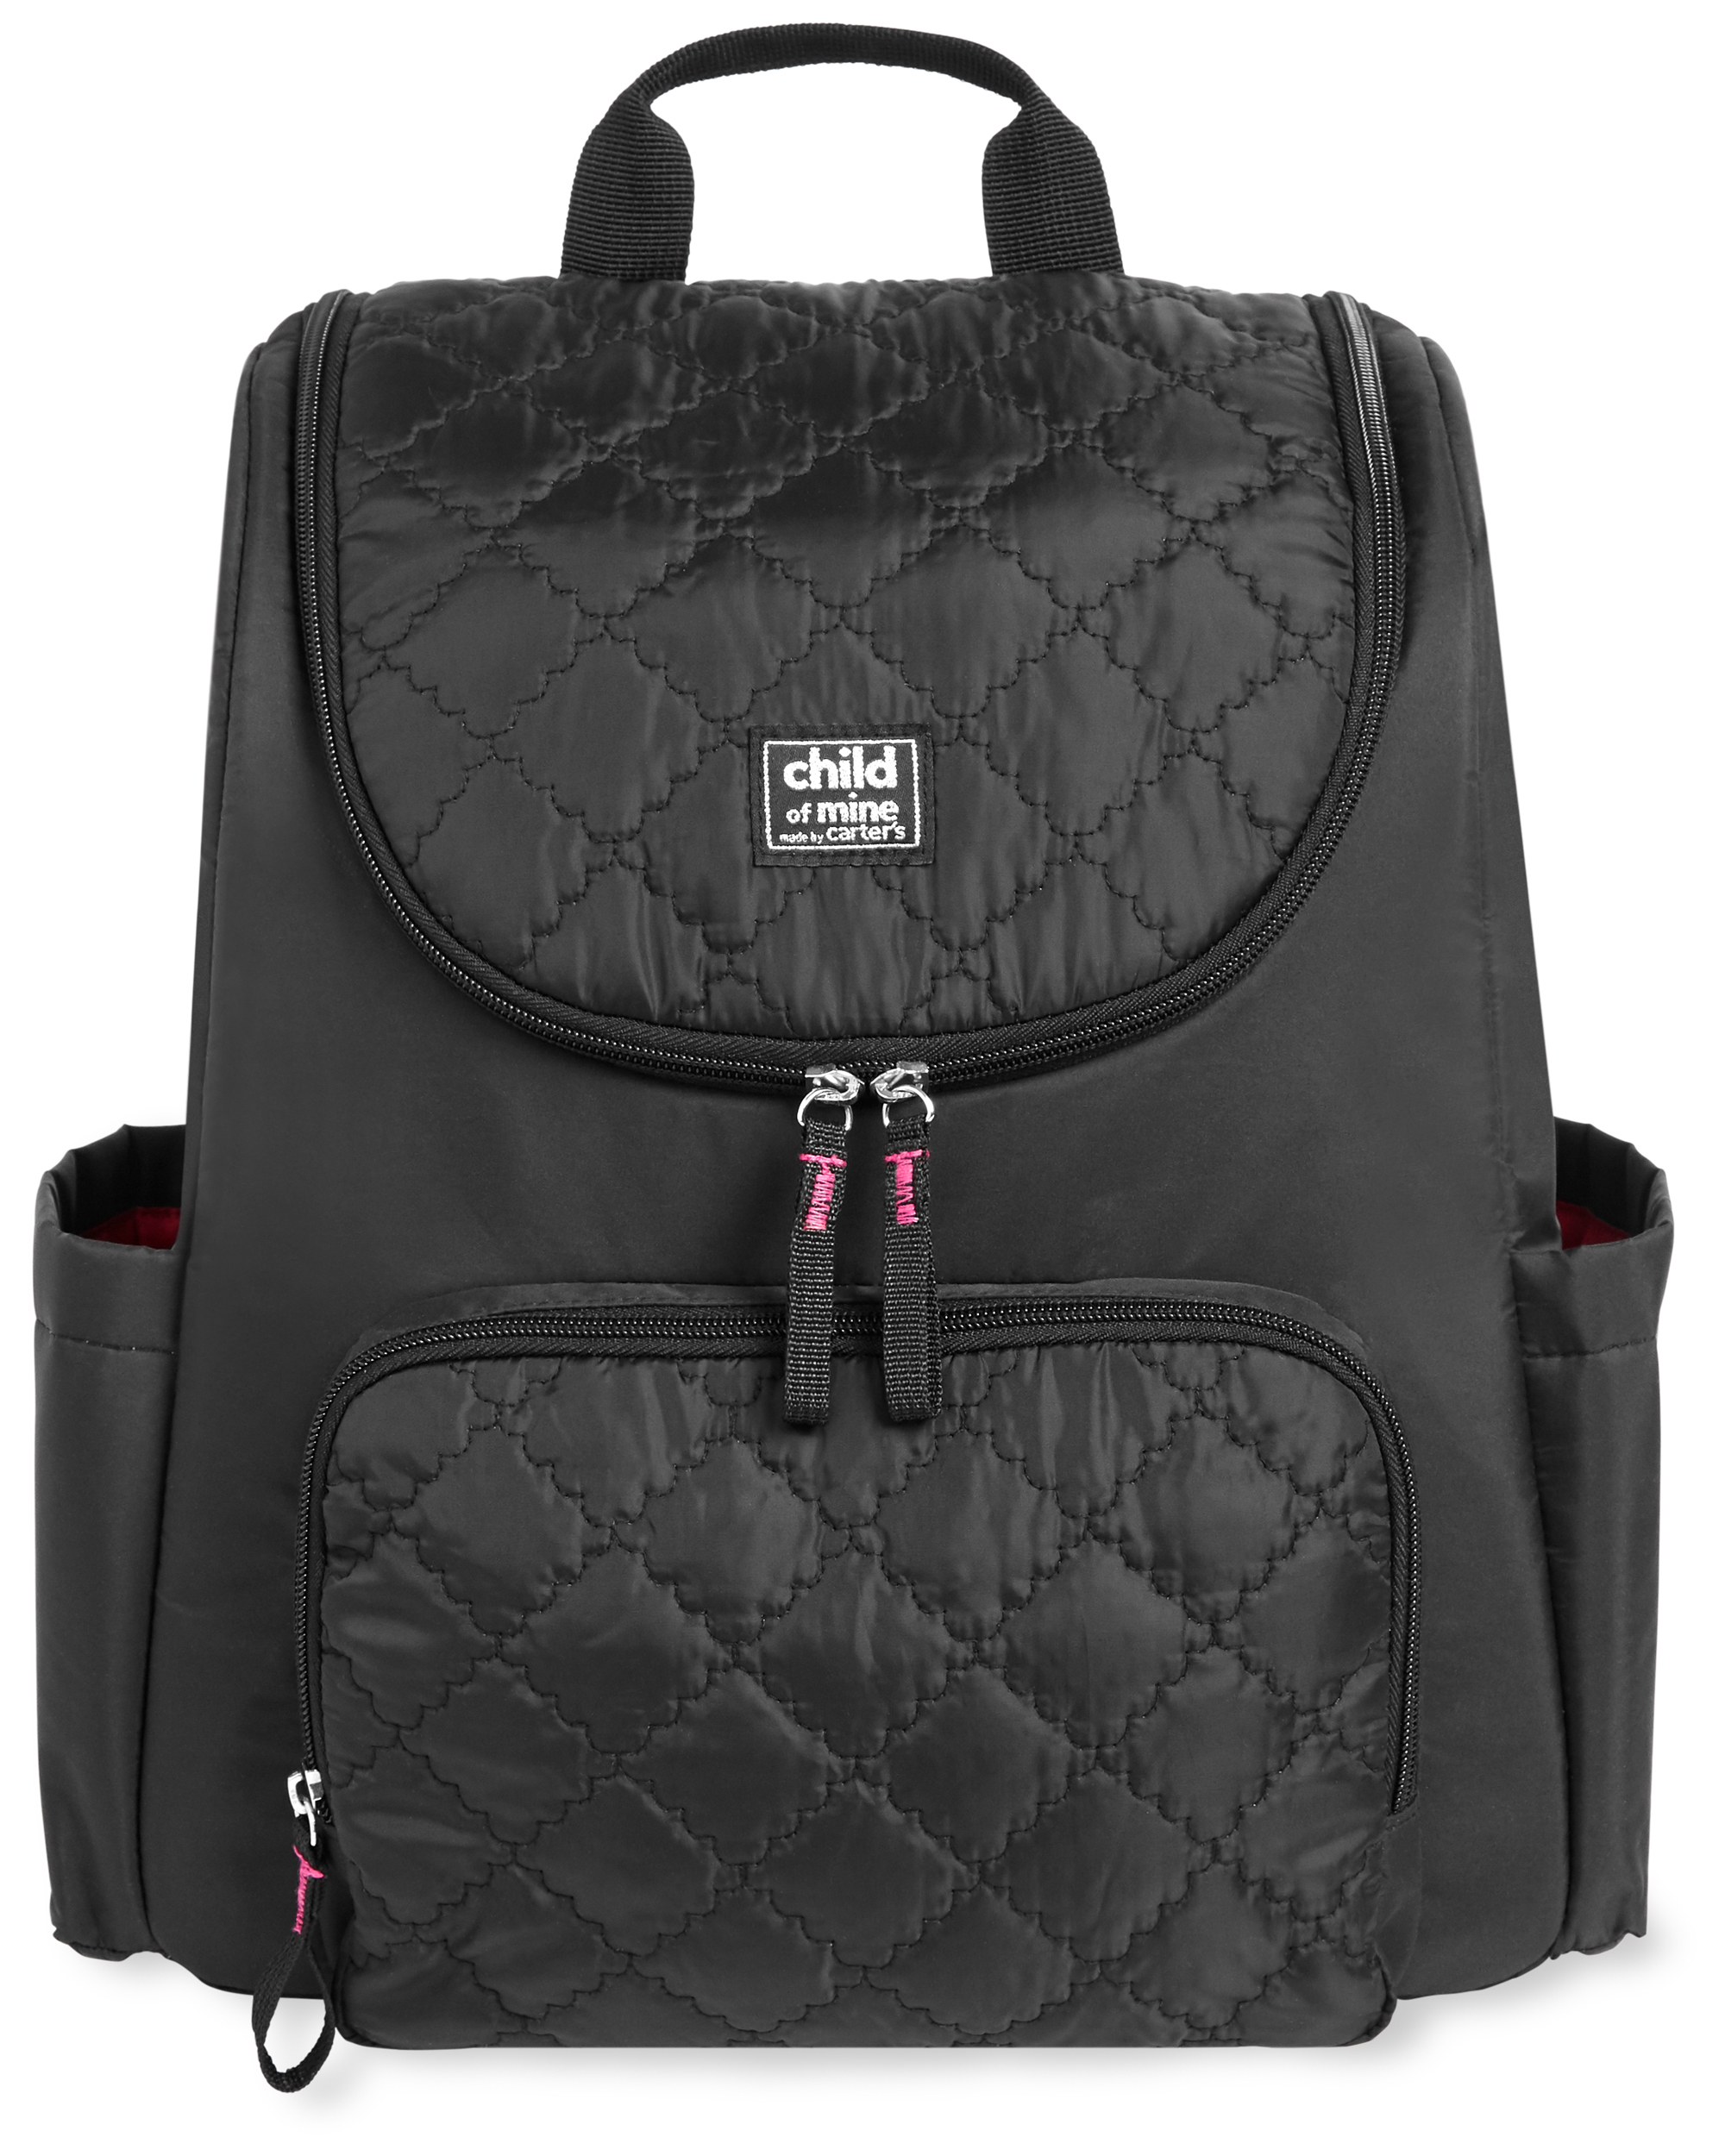 Child of Mine by Carter's Changing Pad Included Backpack Diaper Bag, Black Quilted - image 1 of 12